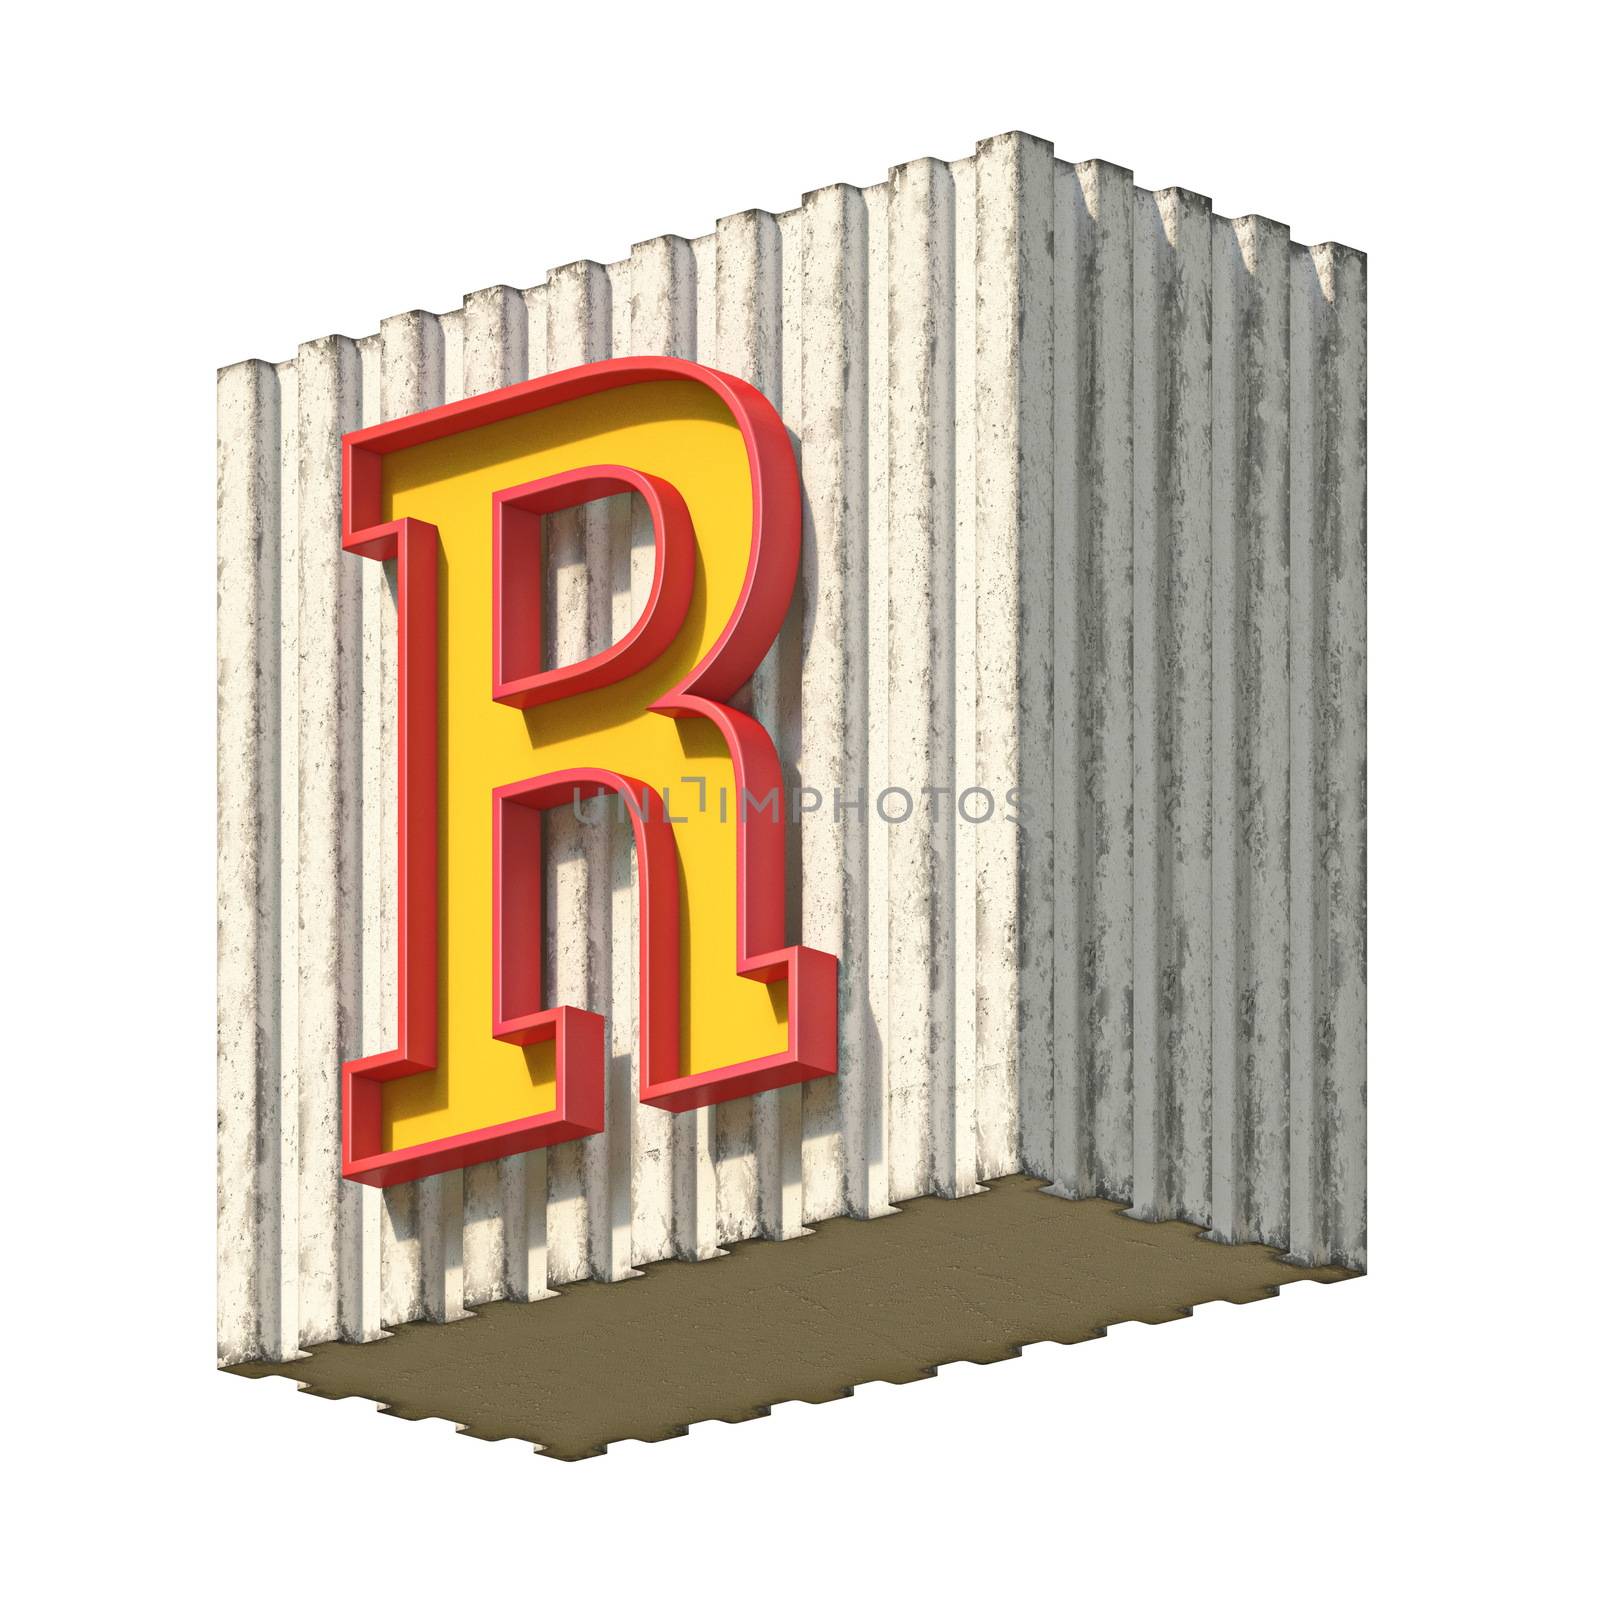 Vintage concrete red yellow font Letter R 3D render illustration isolated on white background